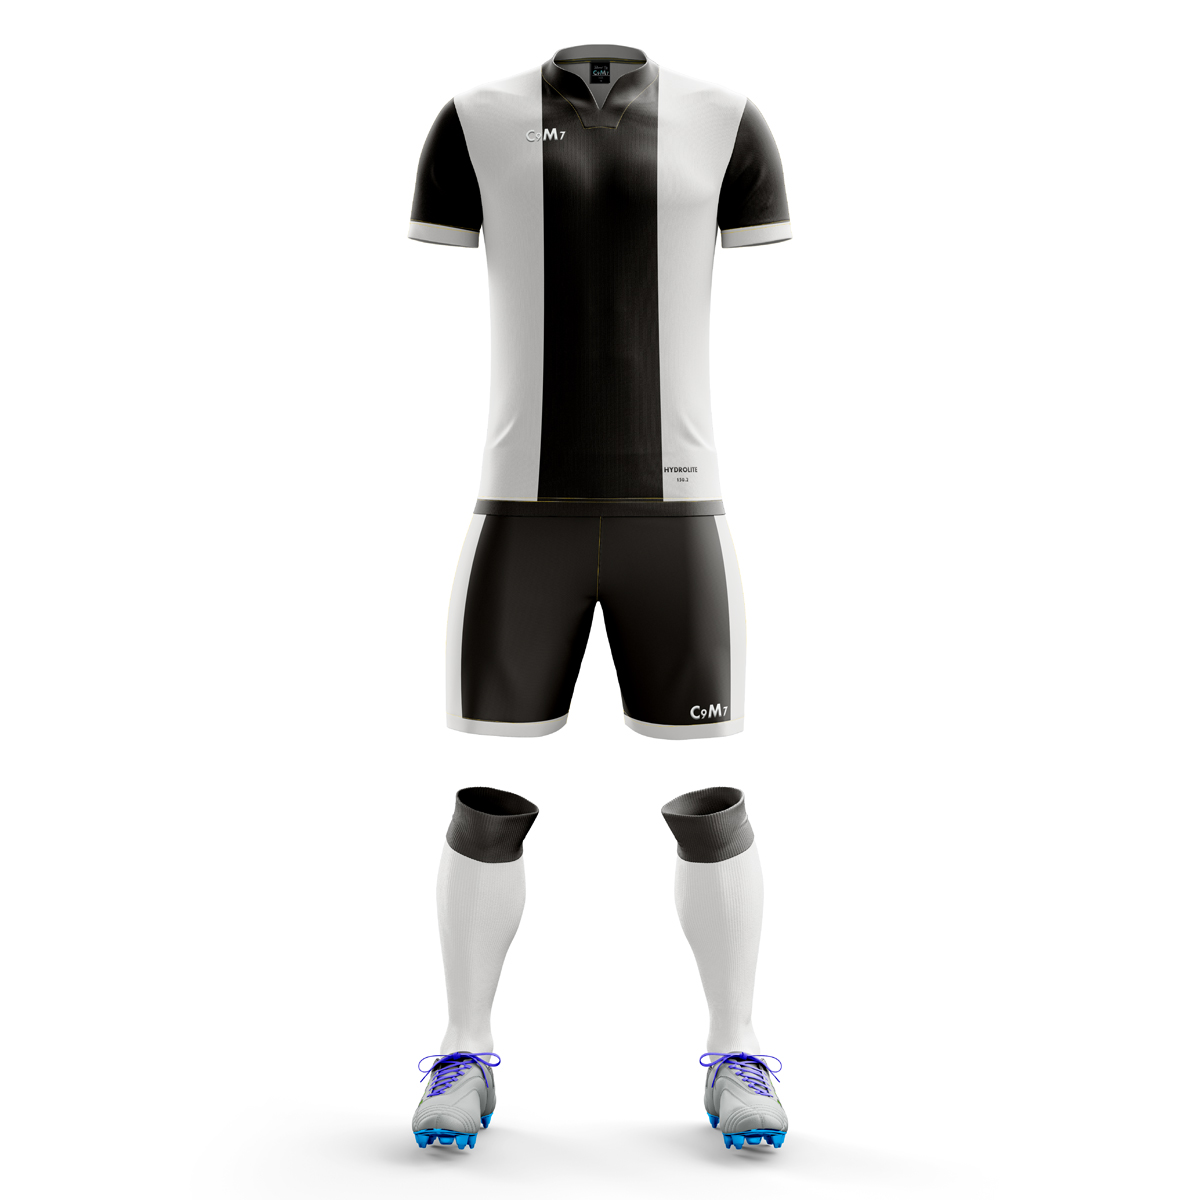 The Elastico Kids Football Sports Jerseys, $36.90 Inluding all printing